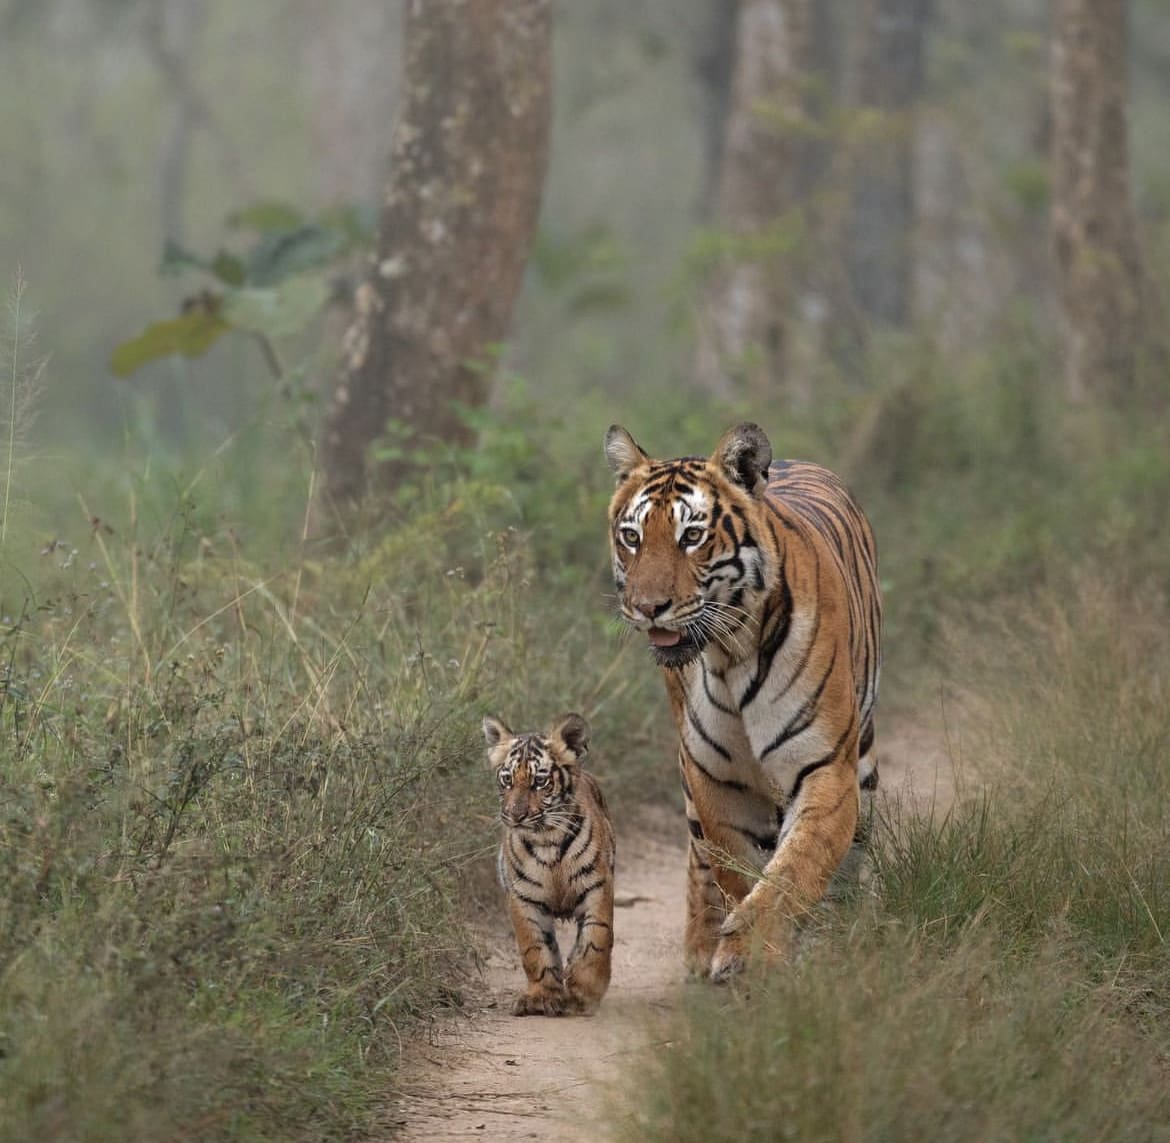 Tiger mother and cub in Bandipur National Park